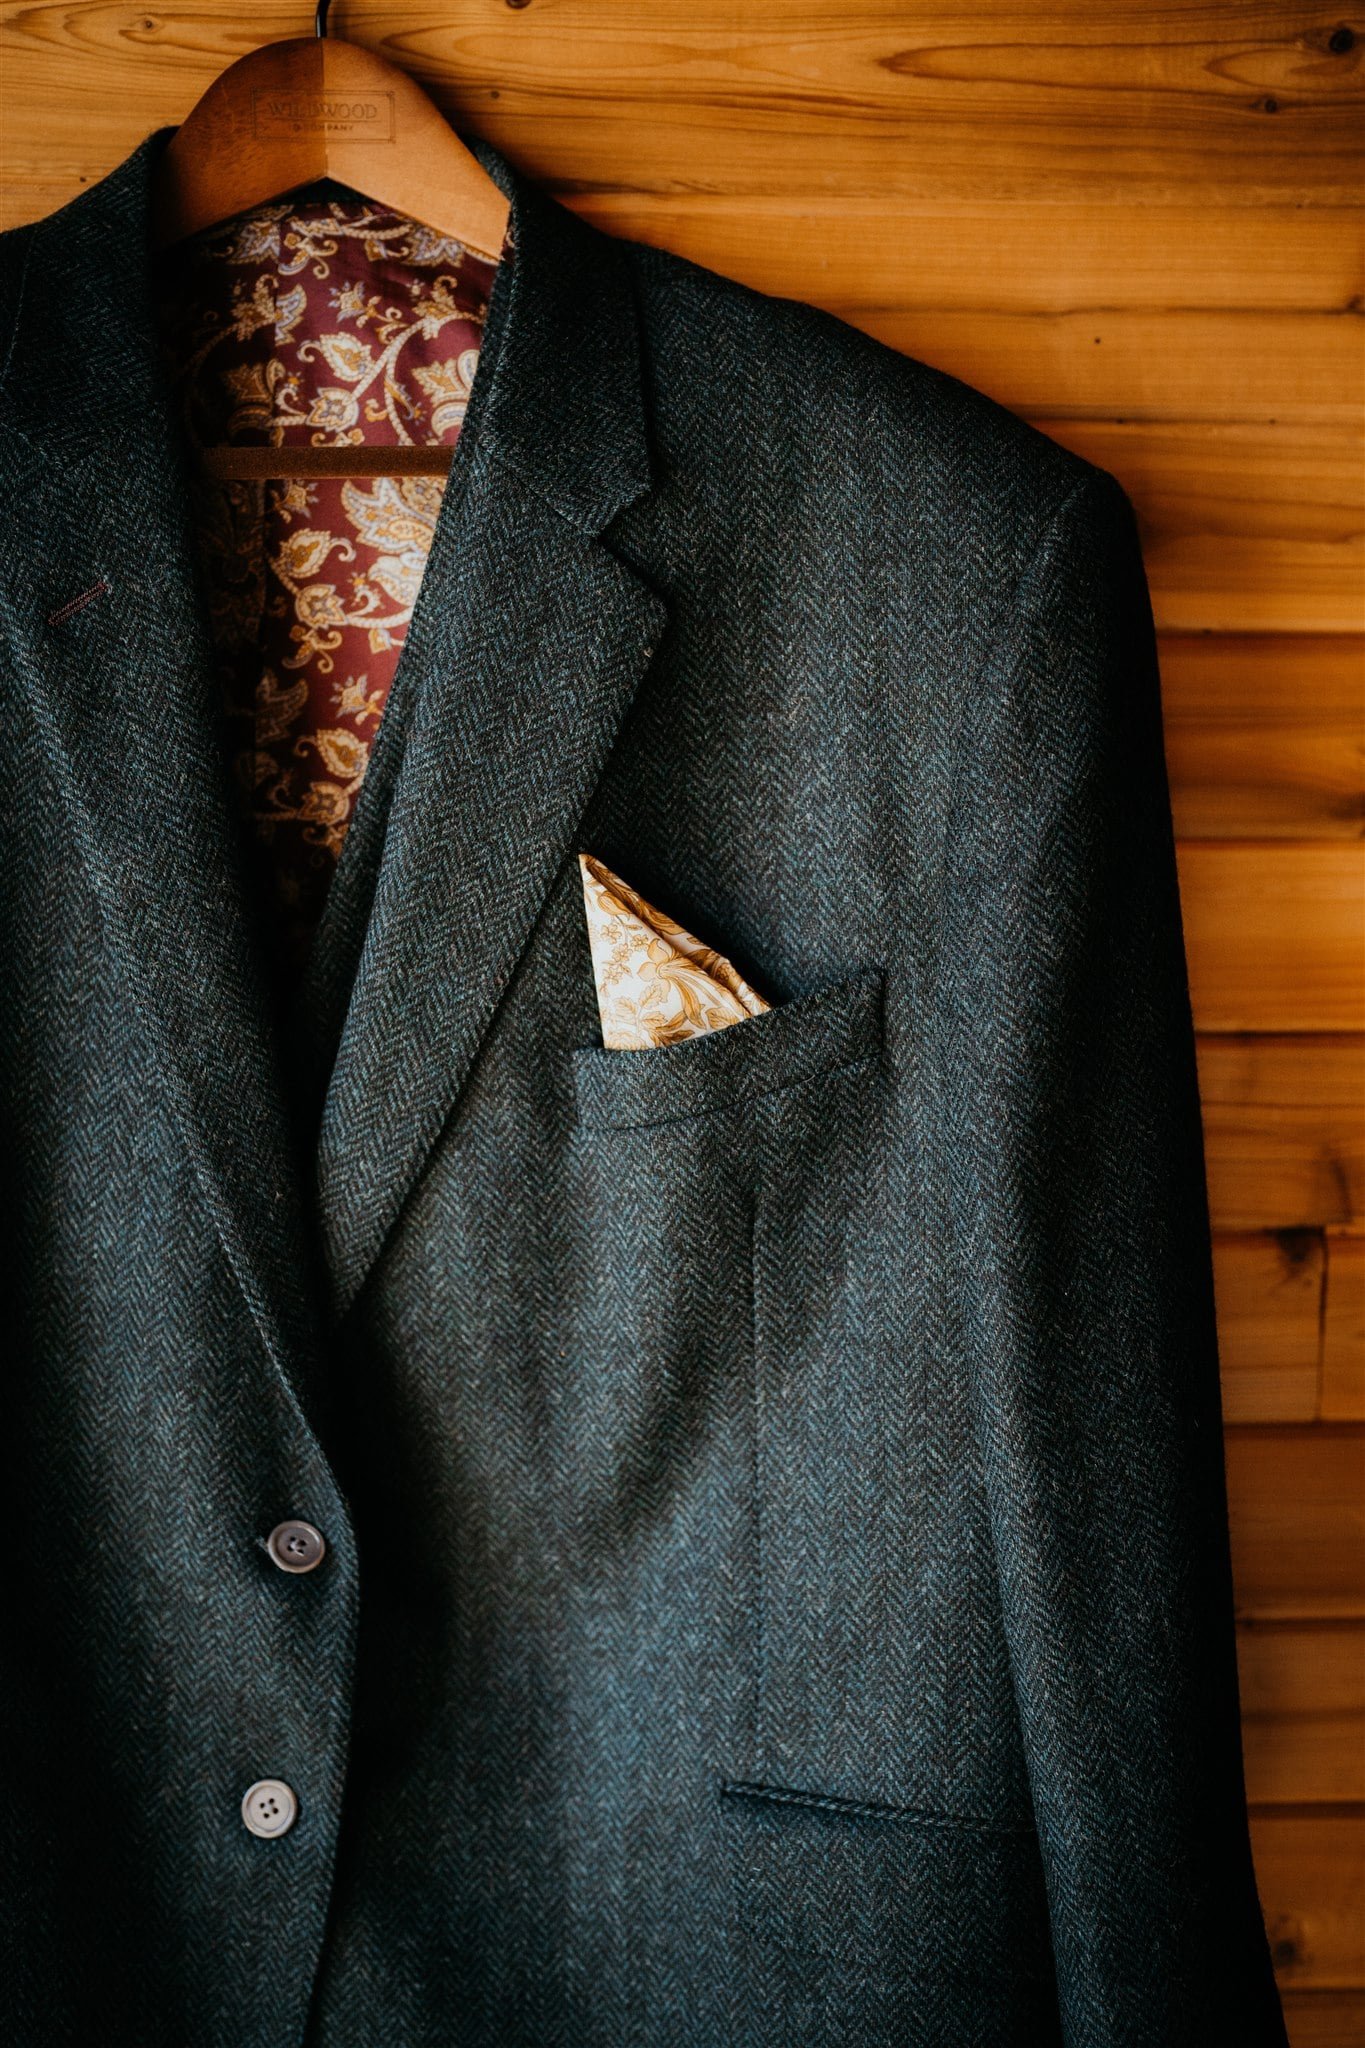 Gray wedding suit with paisley lining and handkerchief